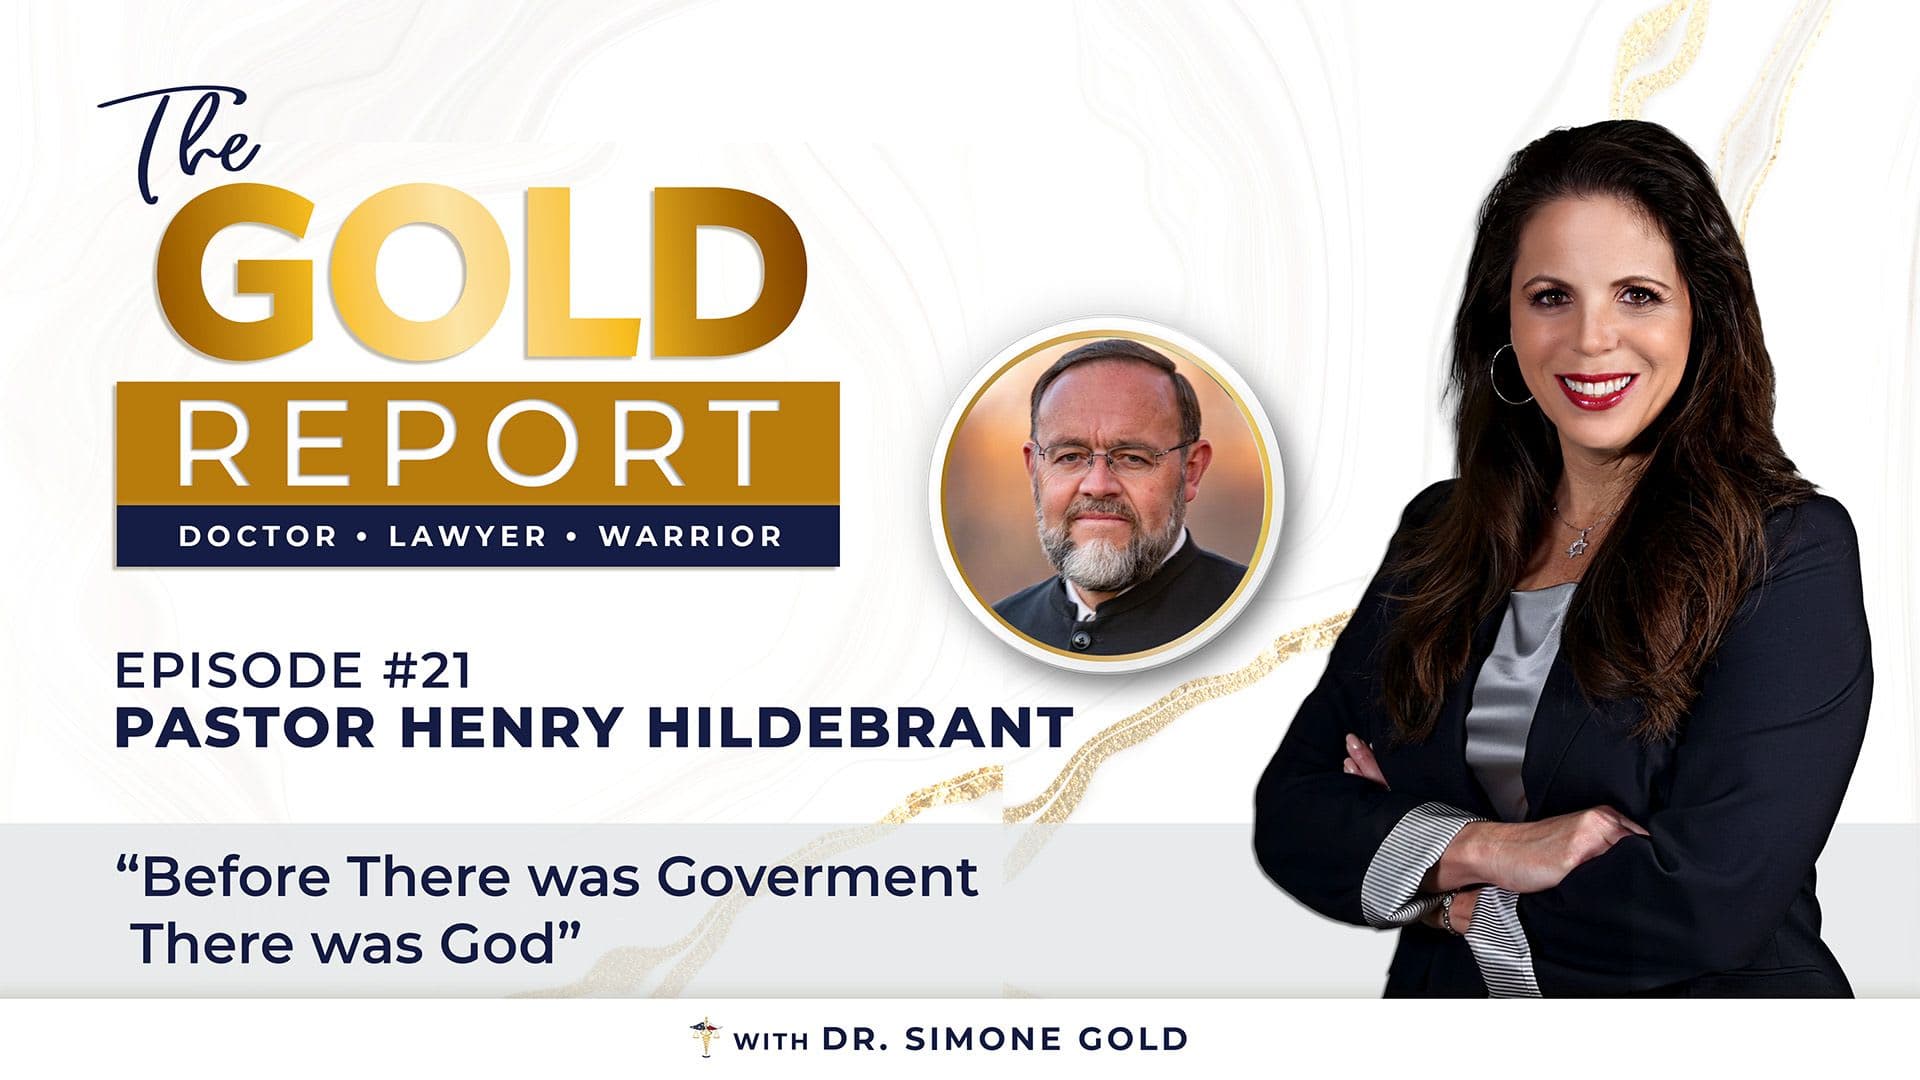 The Gold Report: Ep. 20 'Before There Was Government, There Was God' with Pastor Henry Hildebrandt